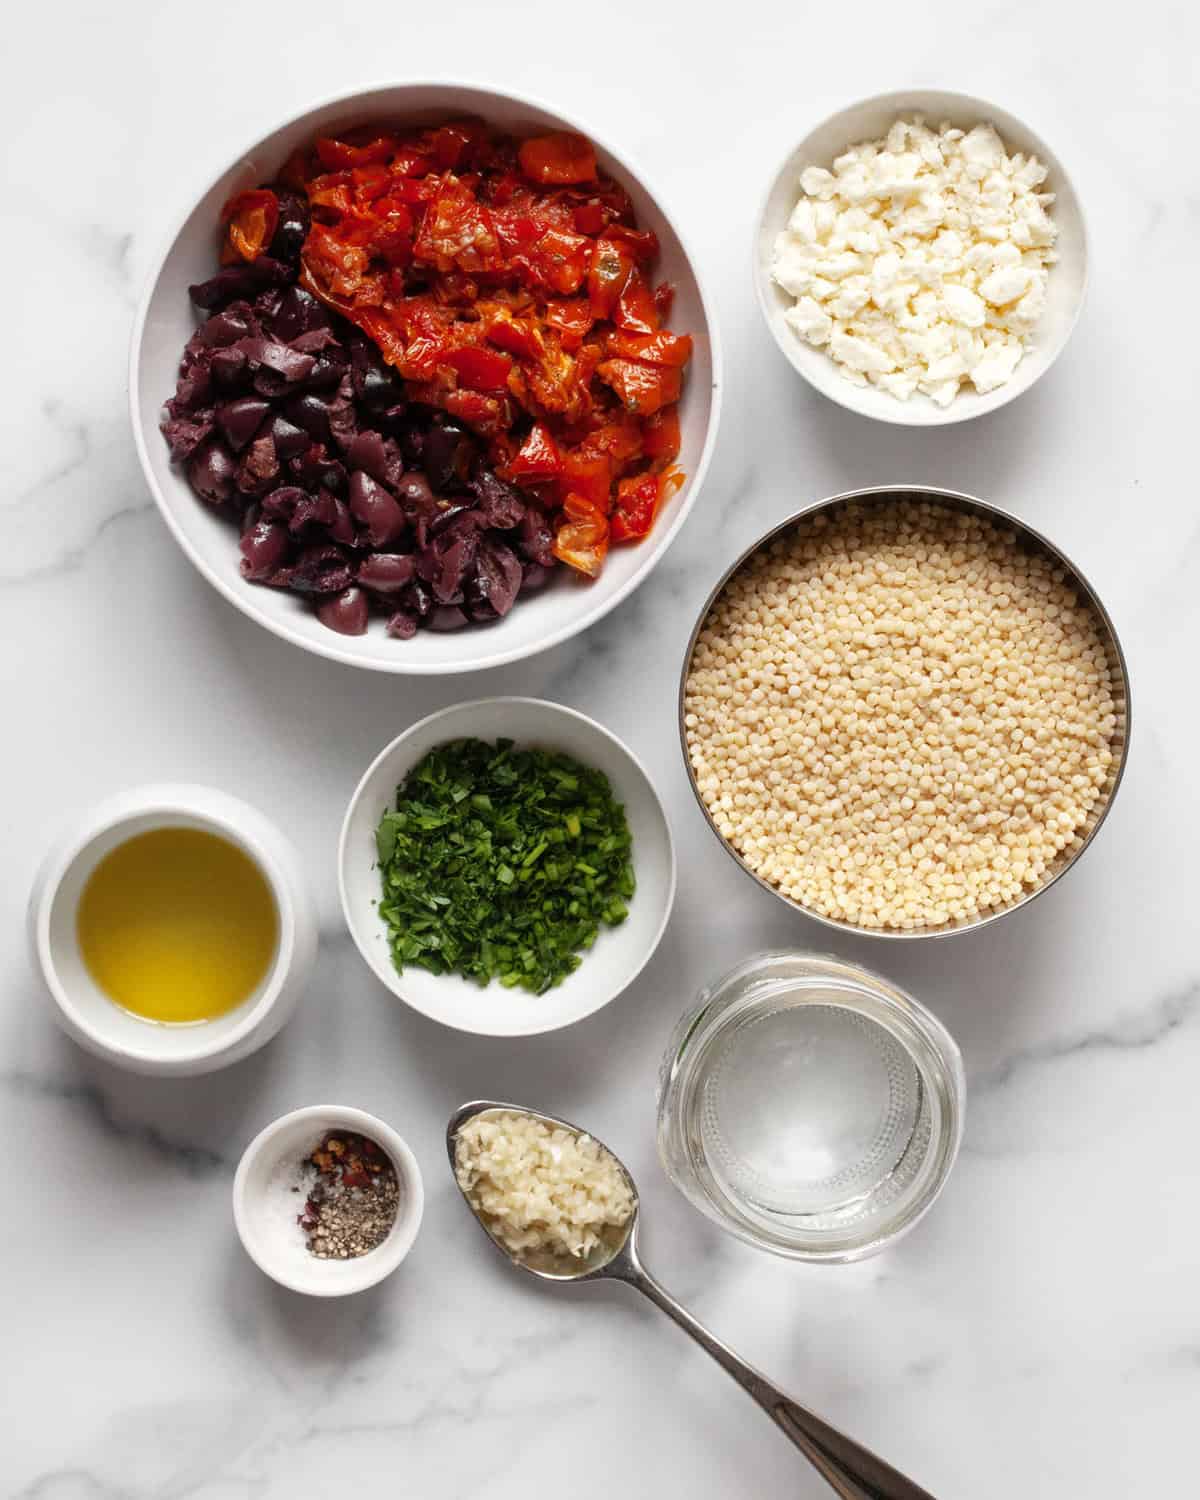 Ingredient including tomatoes, olives, pearl couscous, feta, garlic, olive oil, herbs and spices.